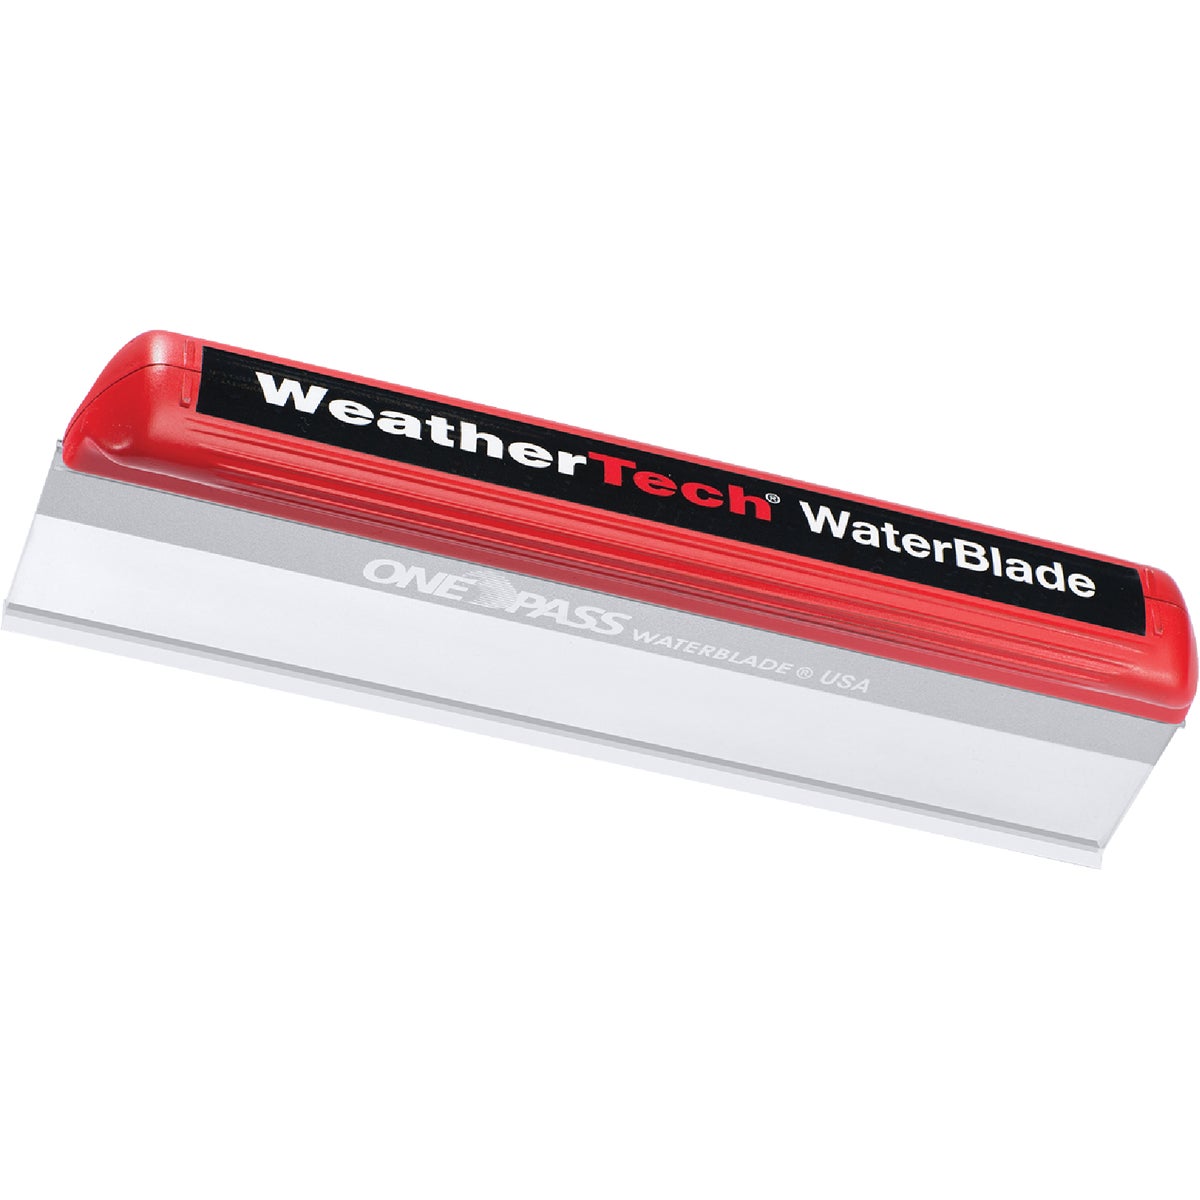 WeatherTech WaterBlade 12 In. Silicone Squeegee